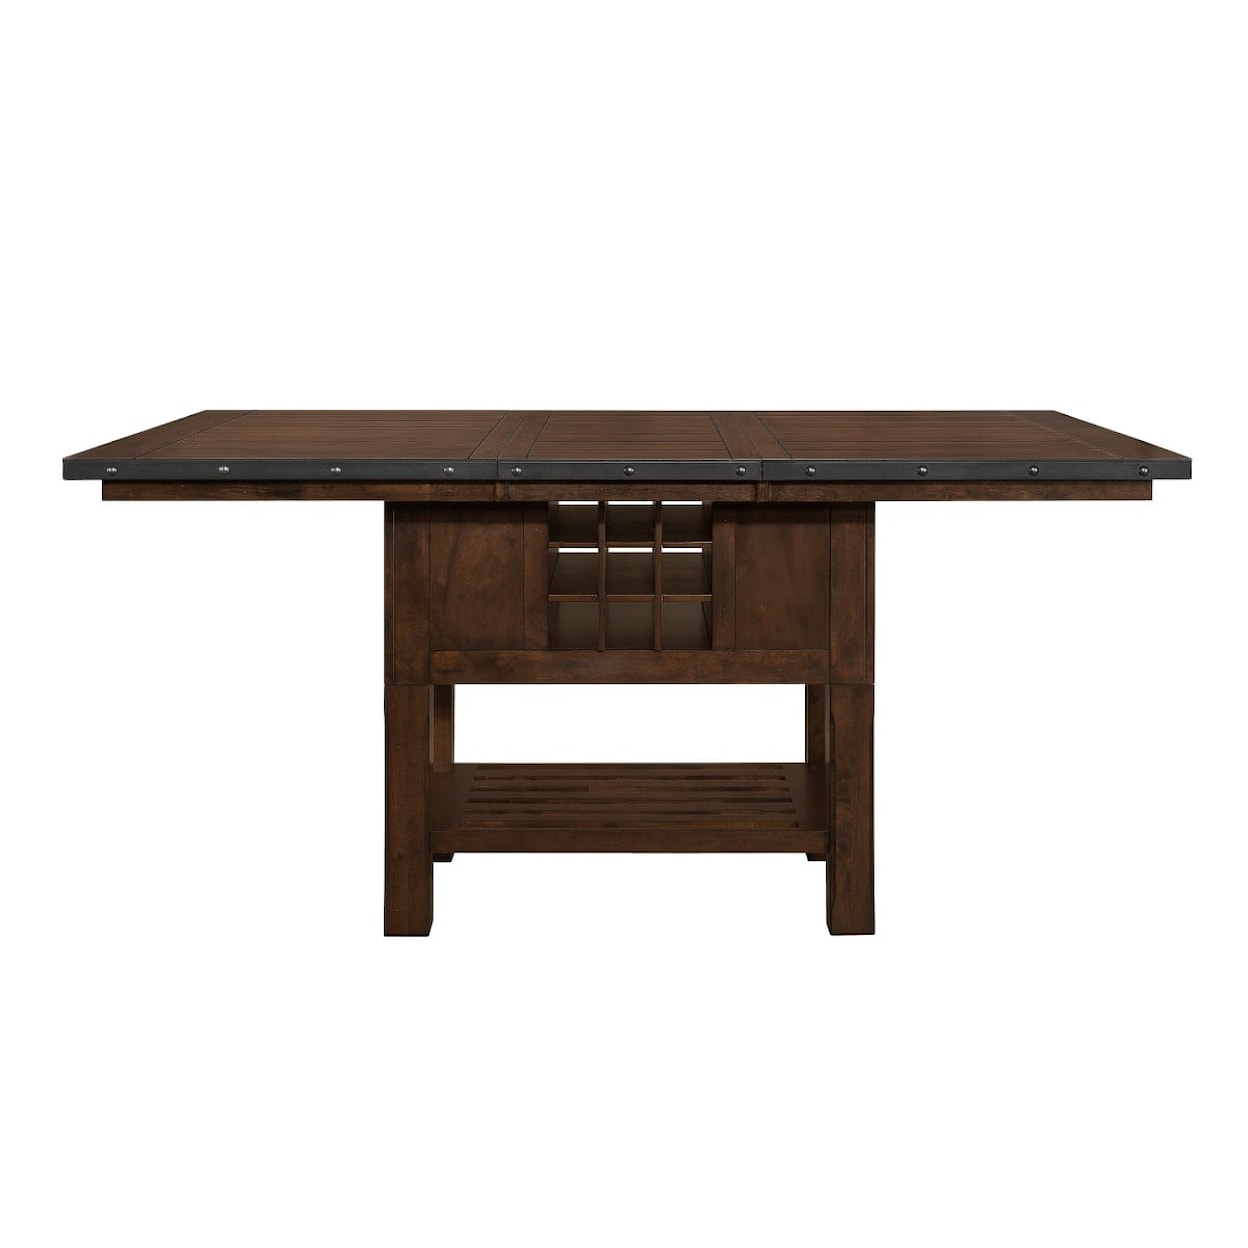 Homelegance Furniture Schleiger Counter Height Table